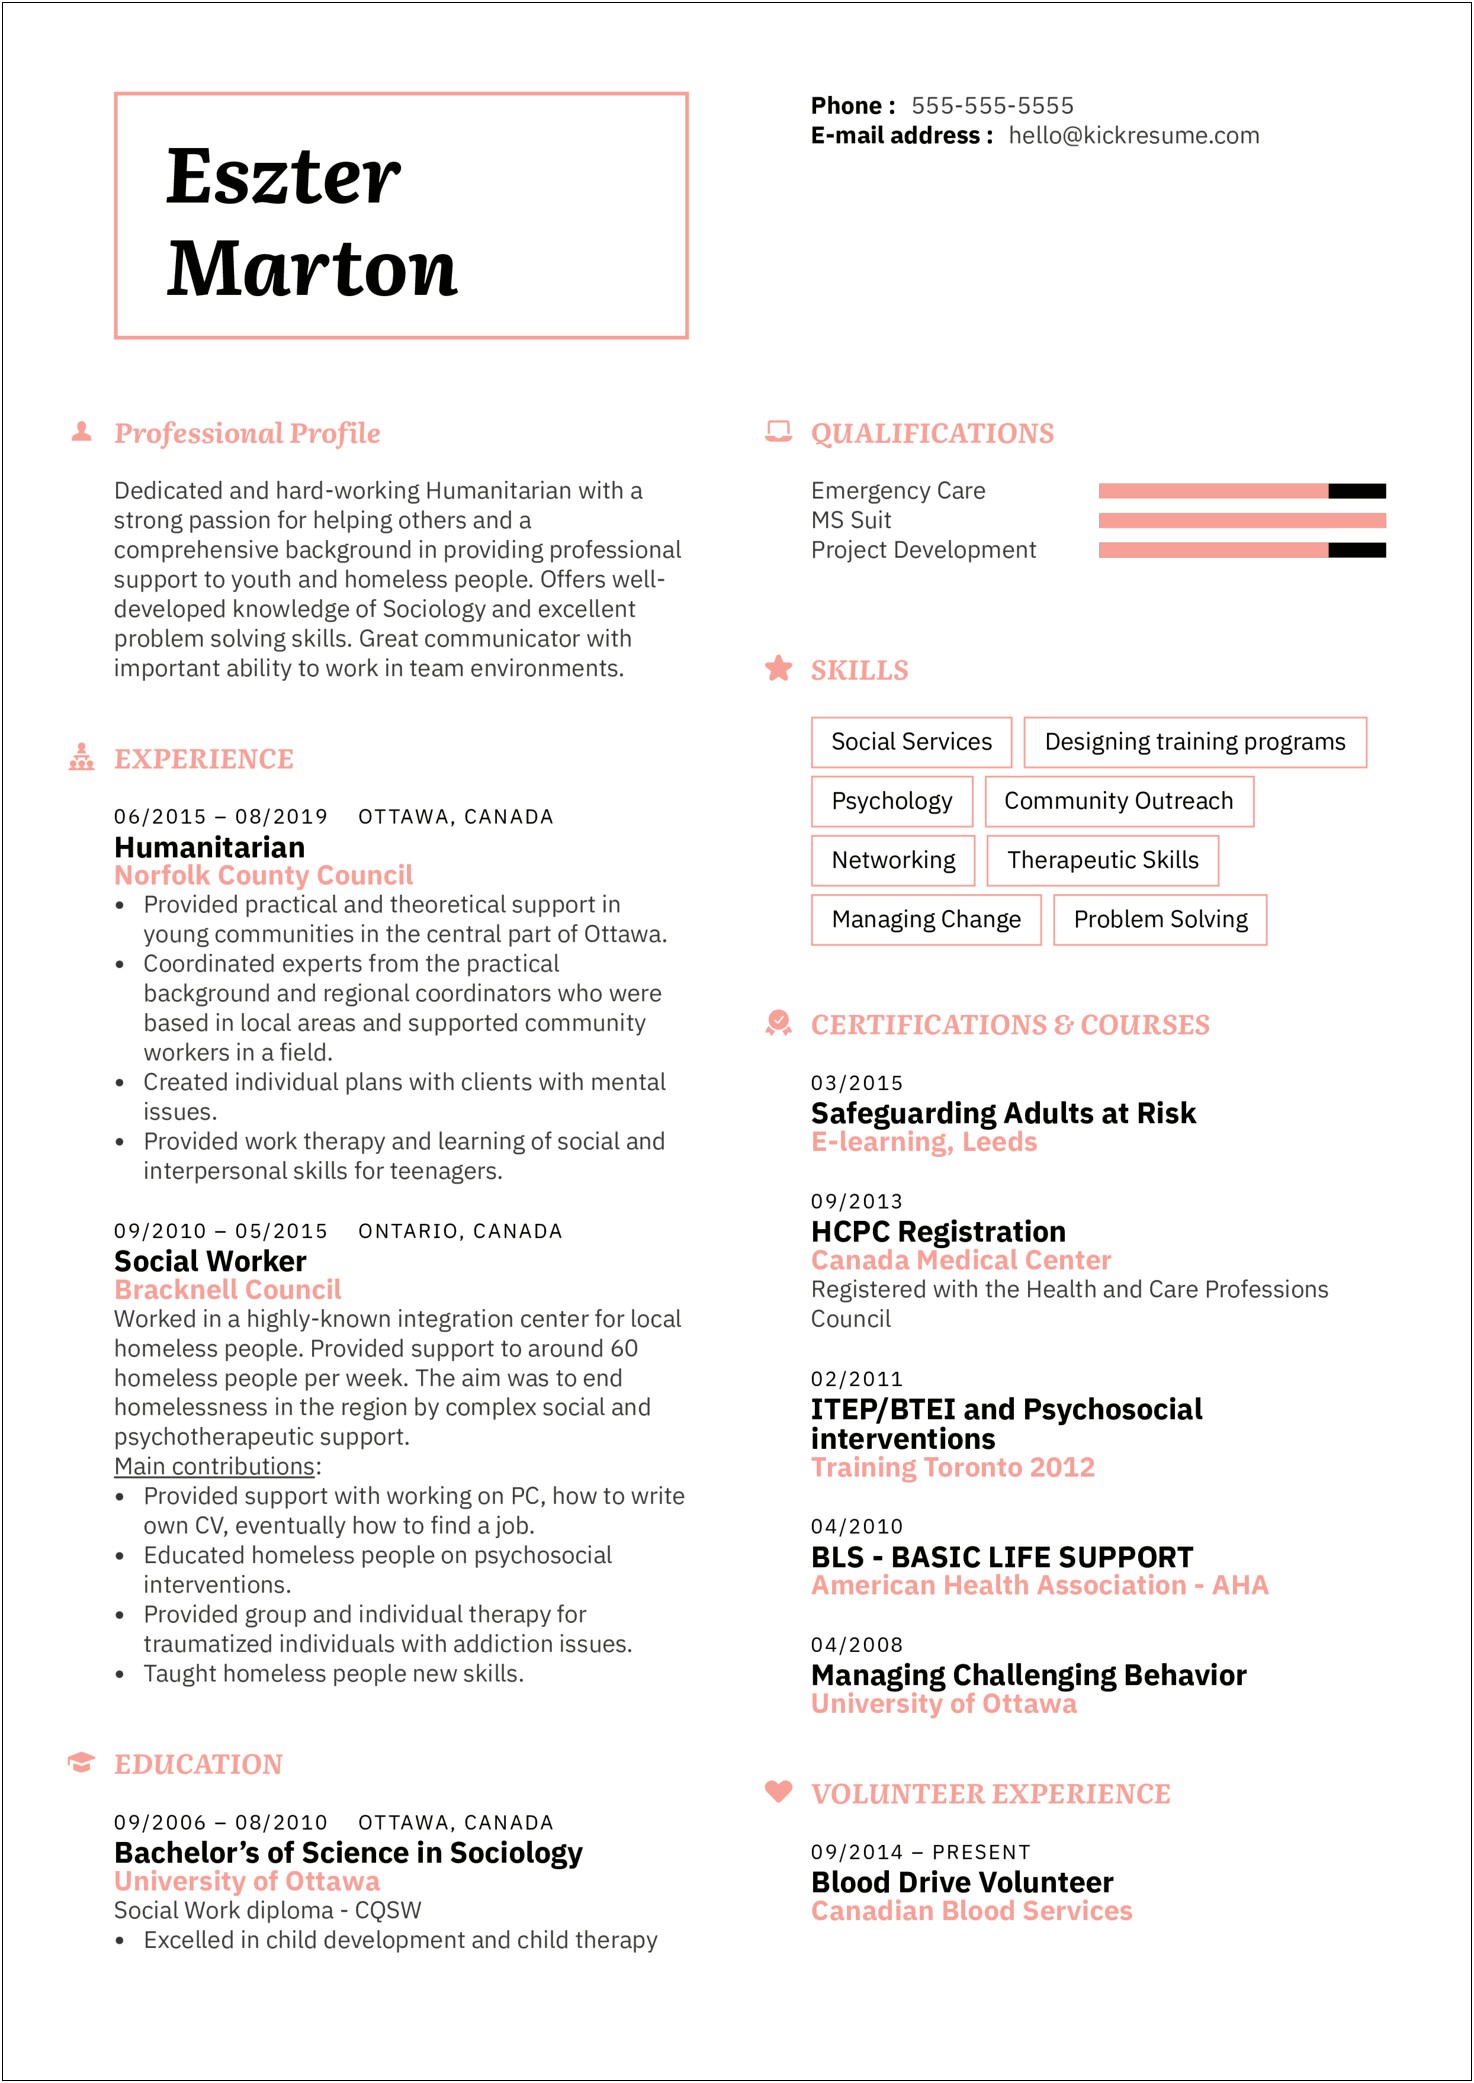 Resume Skills For Support Worker